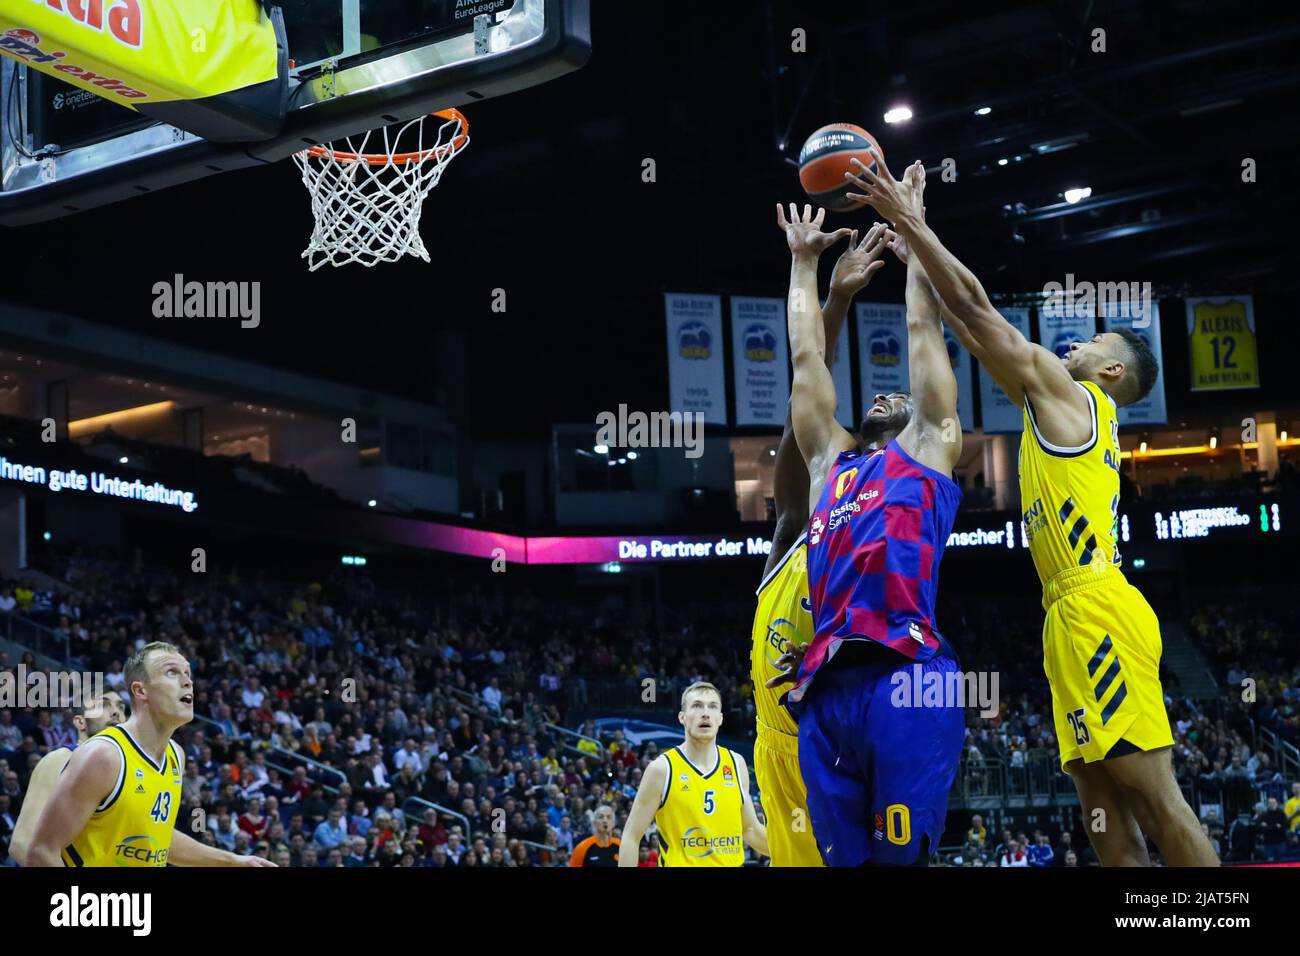 Berlin, Germany, March 04, 2020:Basketball players in action during the EuroLeague match between Alba Berlin and FC Barcelona at Mercedes Benz Arena Stock Photo